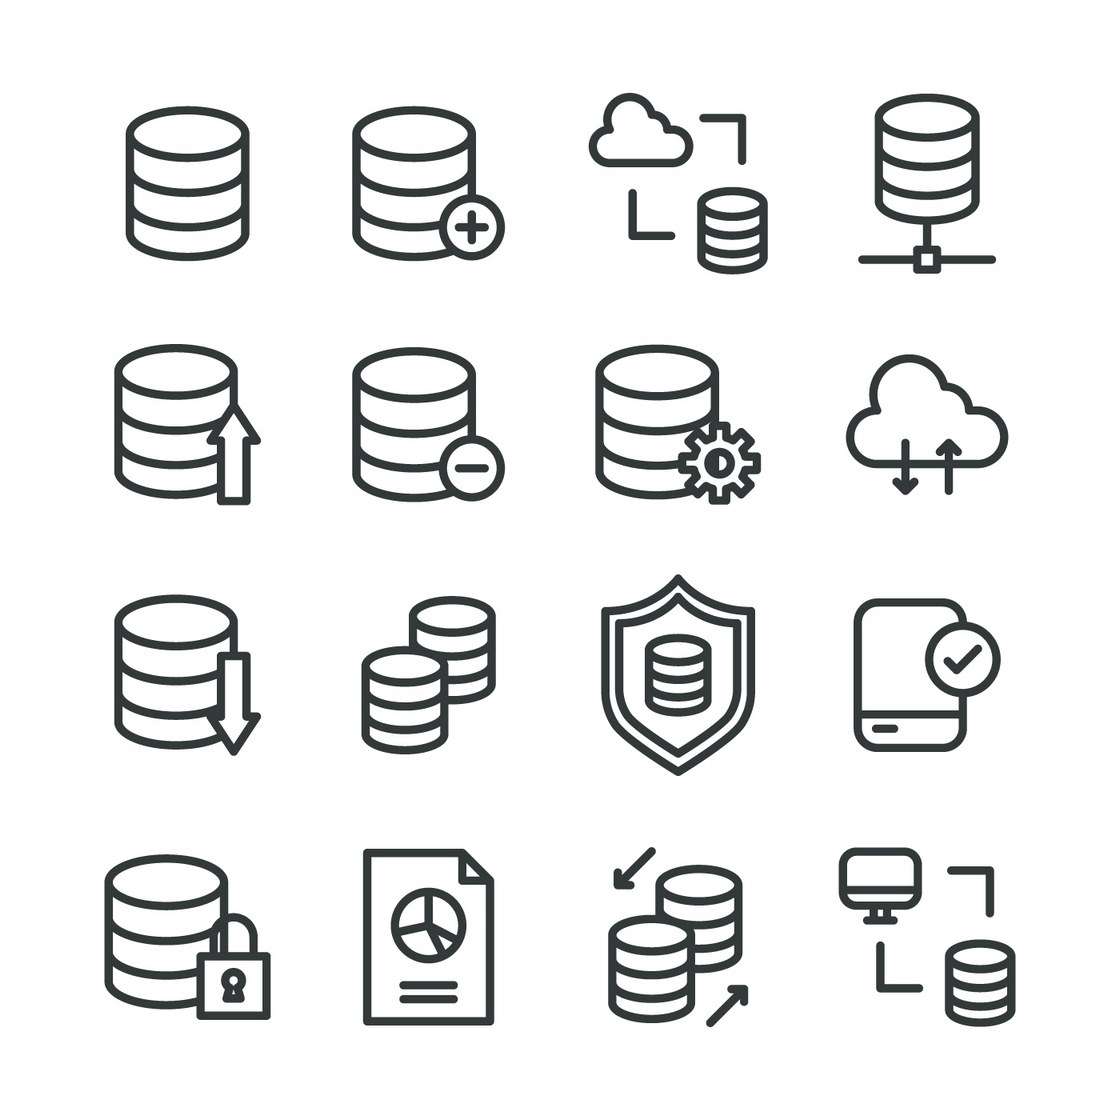 Outlined Icons About Data Base